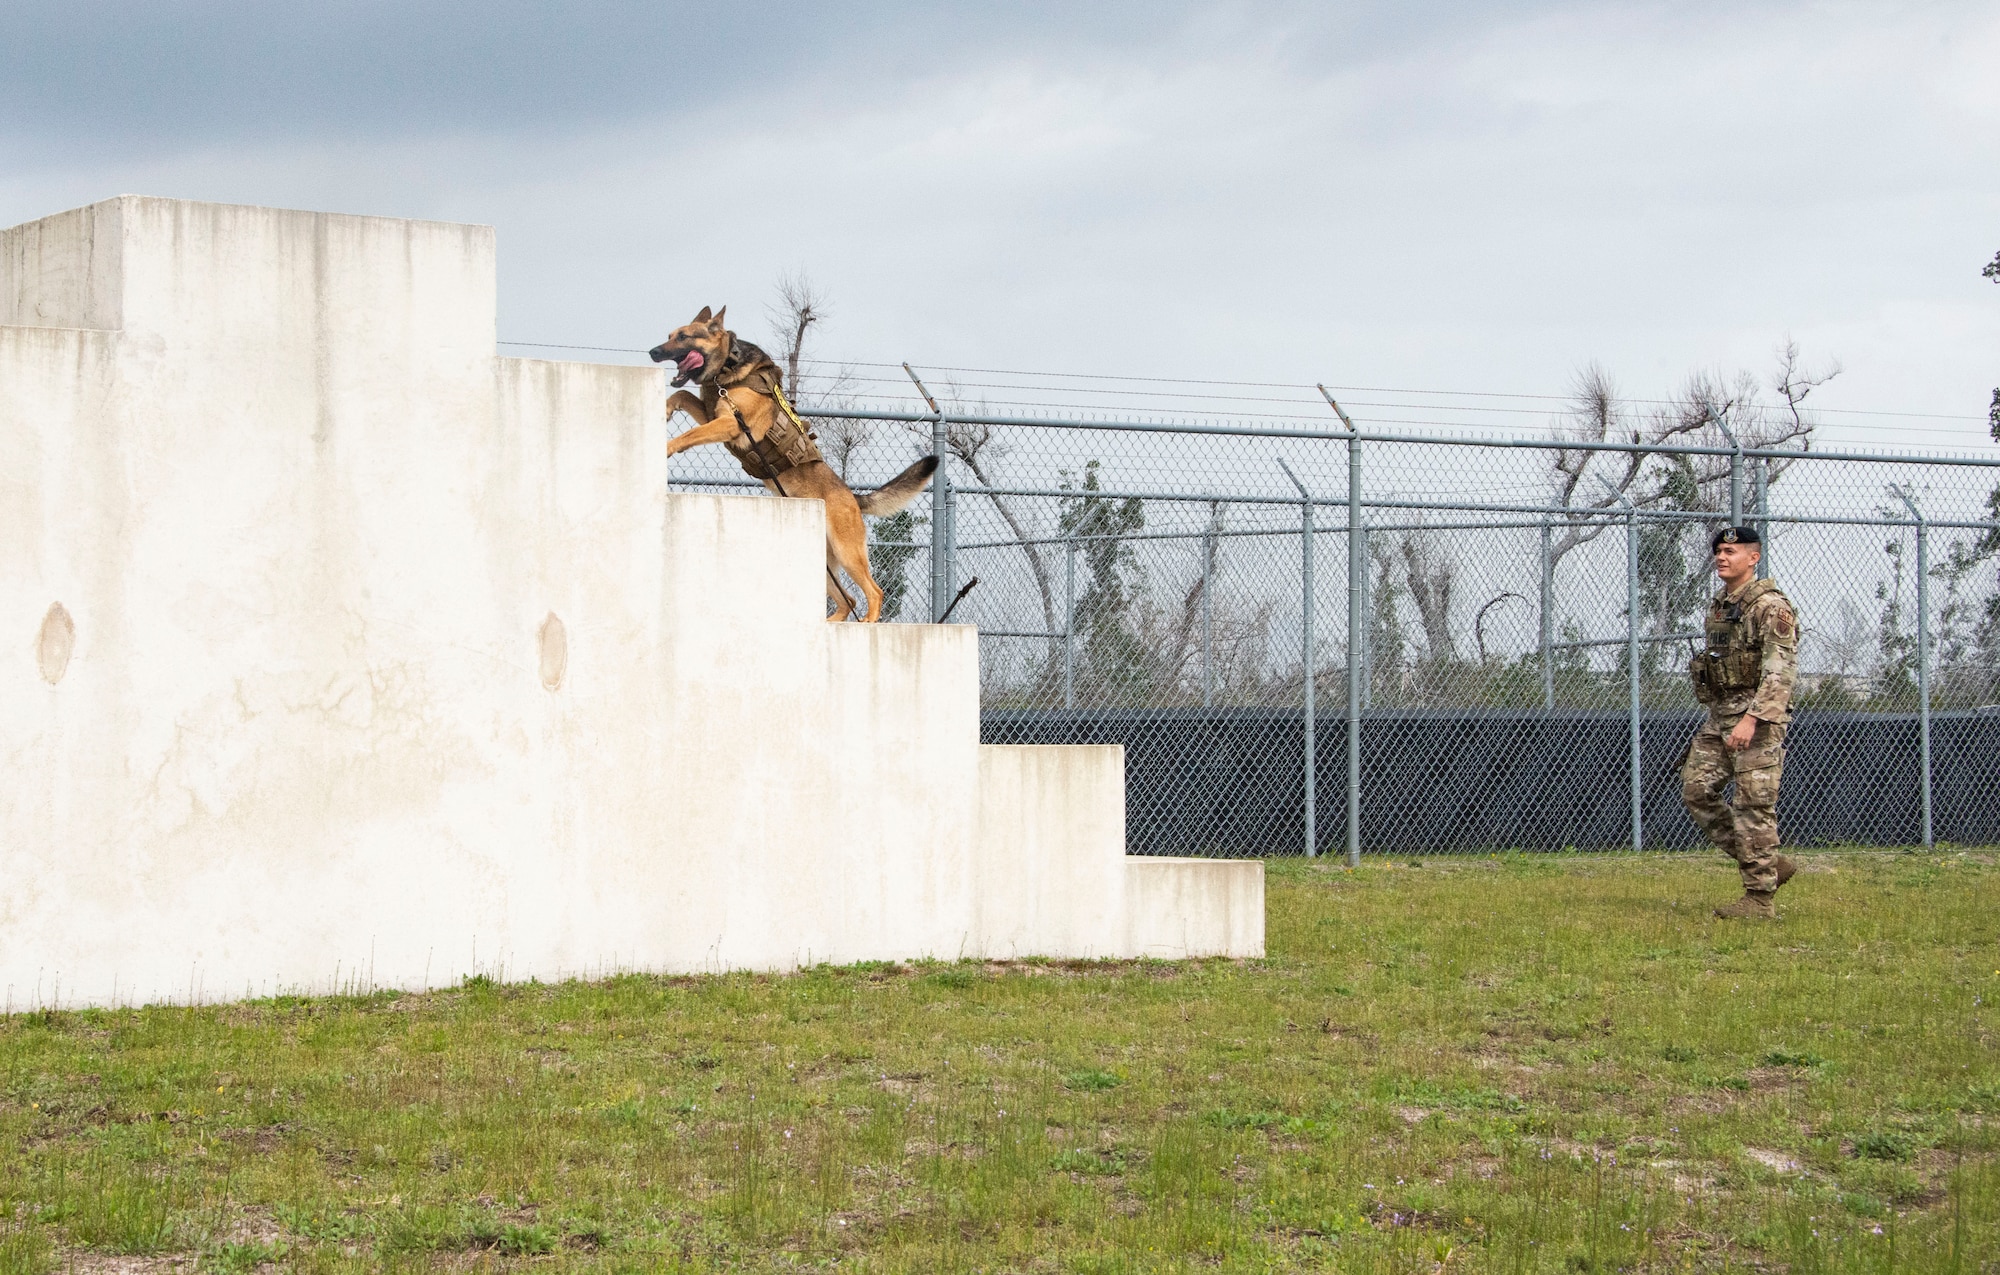 Sunny, a 325th Security Forces Squadron military working dog, bounds up a cement staircase obstacle at Tyndall Air Force Base, Florida, March 3, 2020. Sunny and his handler, Staff Sgt. Jason Vogt, begin their regular duty days with cardio exercise running an enclosed obstacle course. This photo was taken while doing a demonstration for K-9 Veterans Day. (U.S. Air Force photo by 2nd Lt. Kayla Fitzgerald)